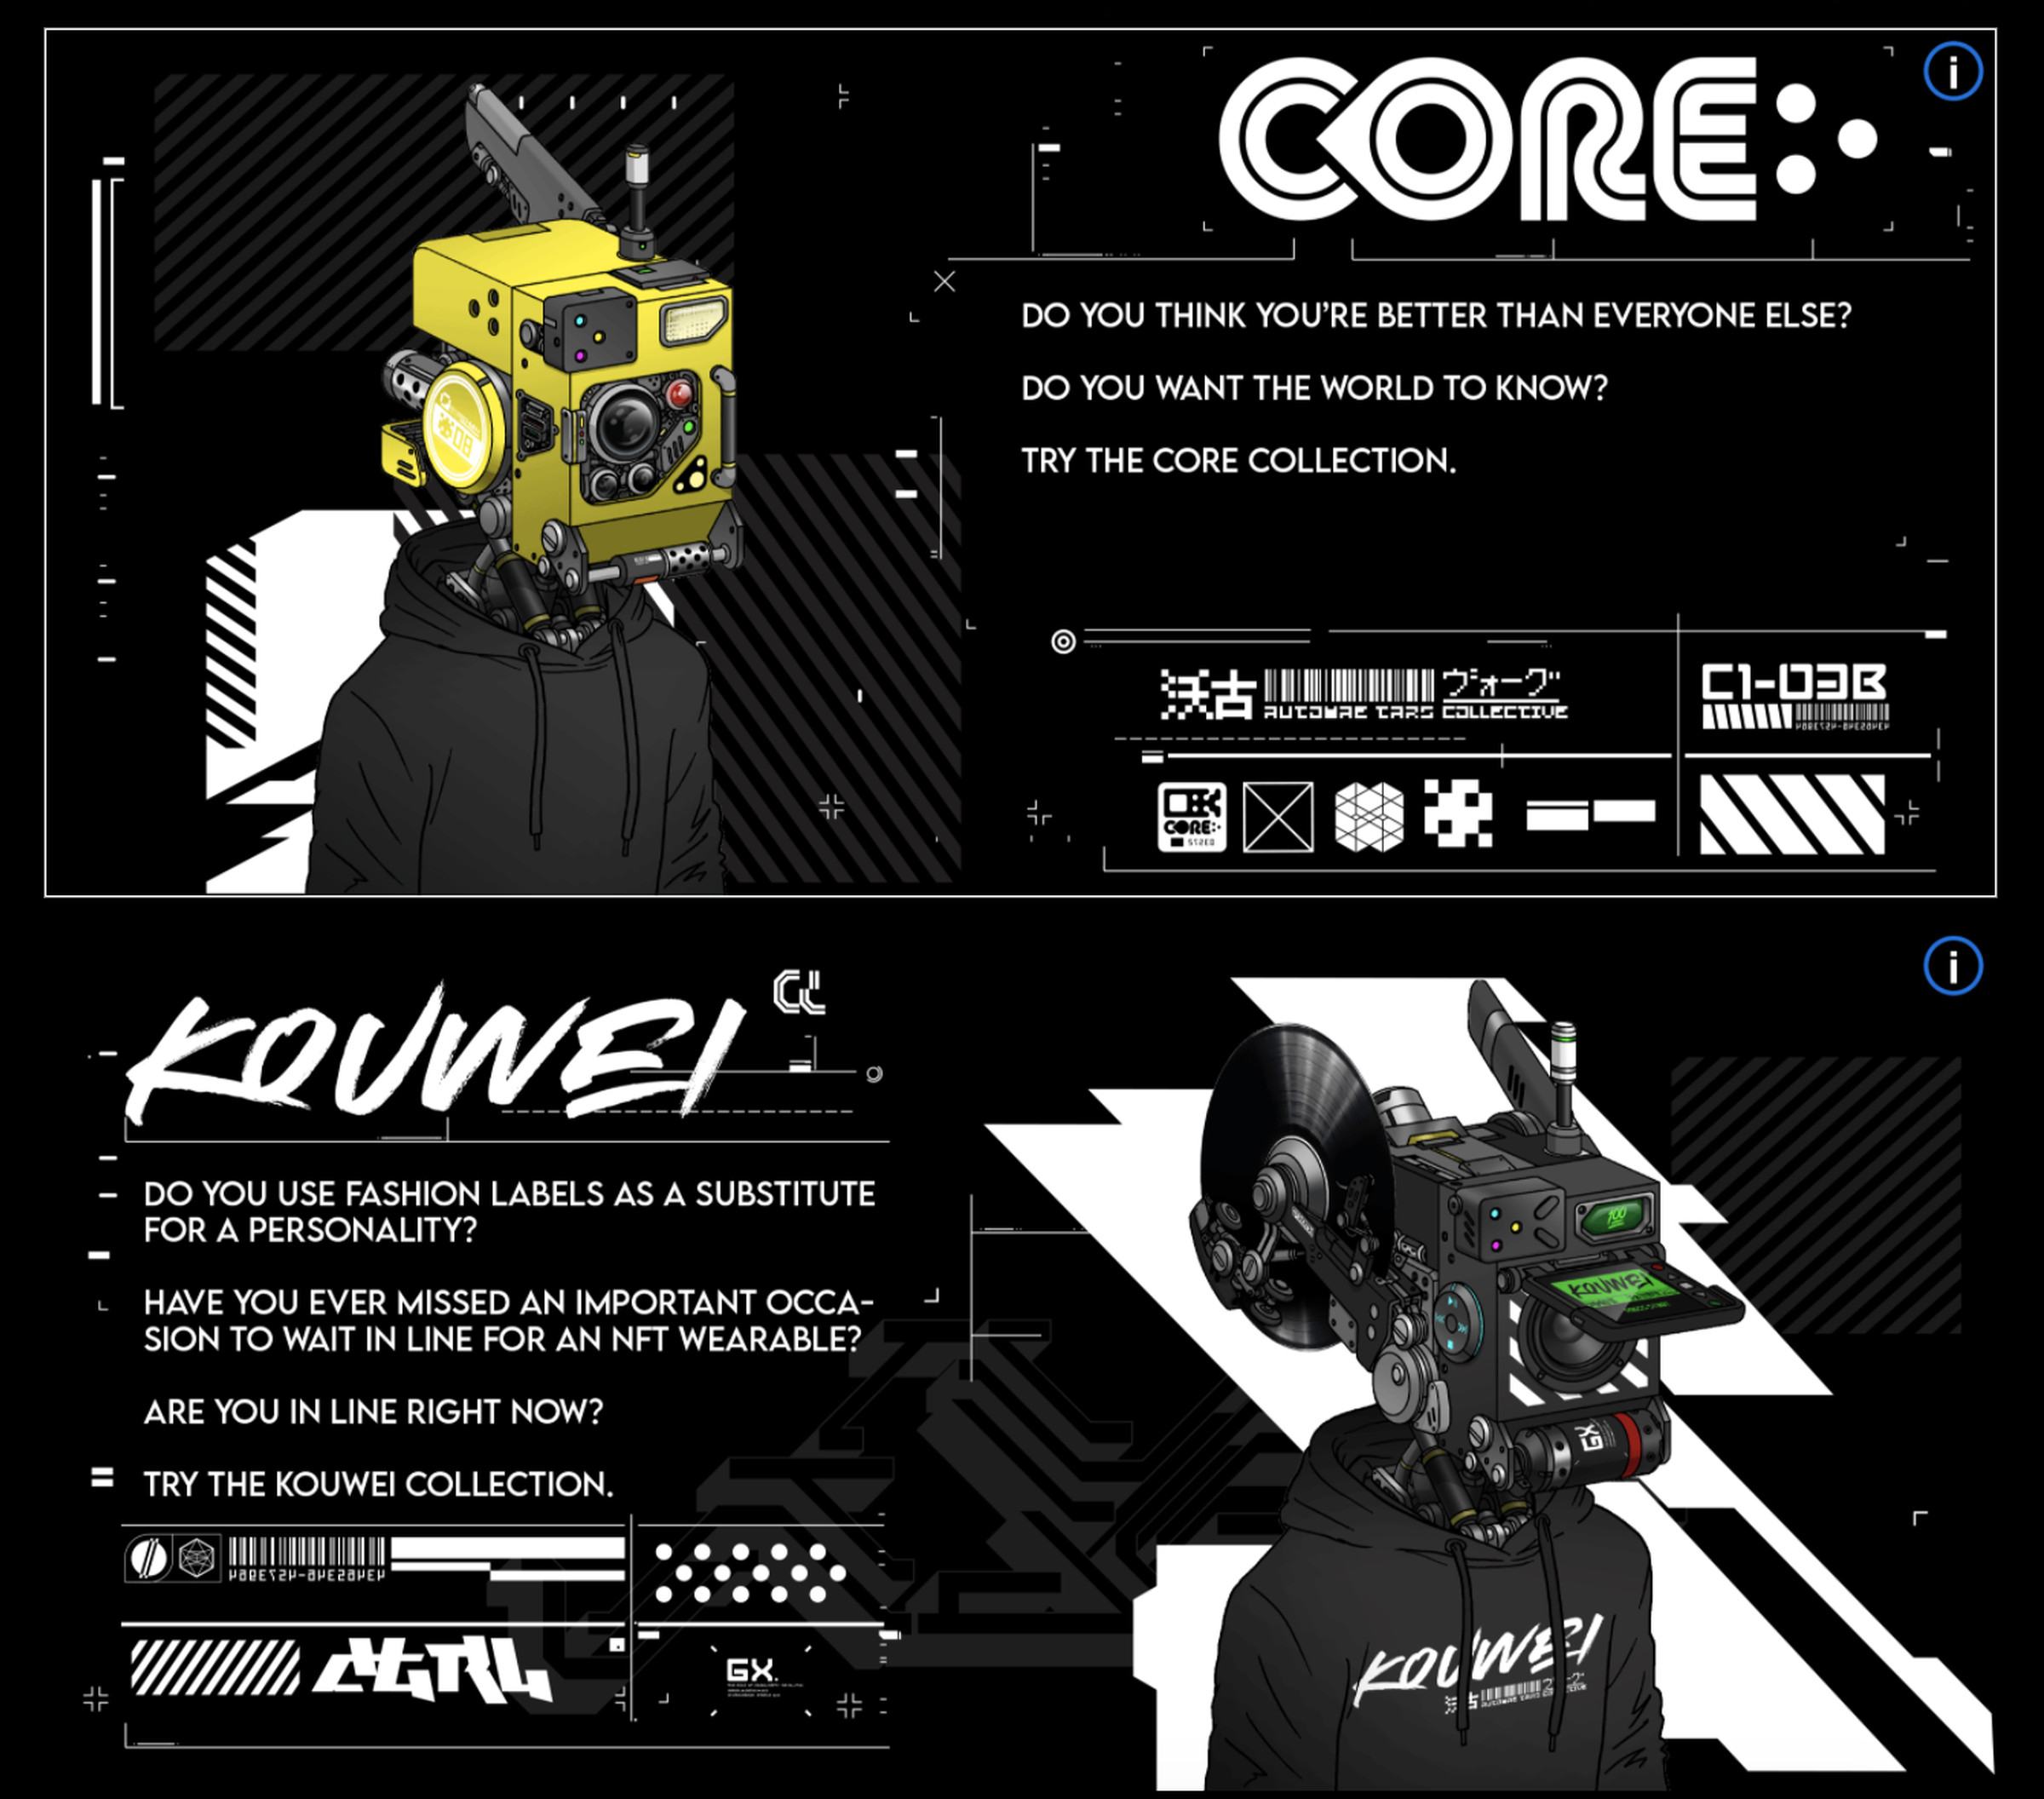 A pair of Vogu TARS robots in streetwear with the titles “Core” and “Kouwei” collection